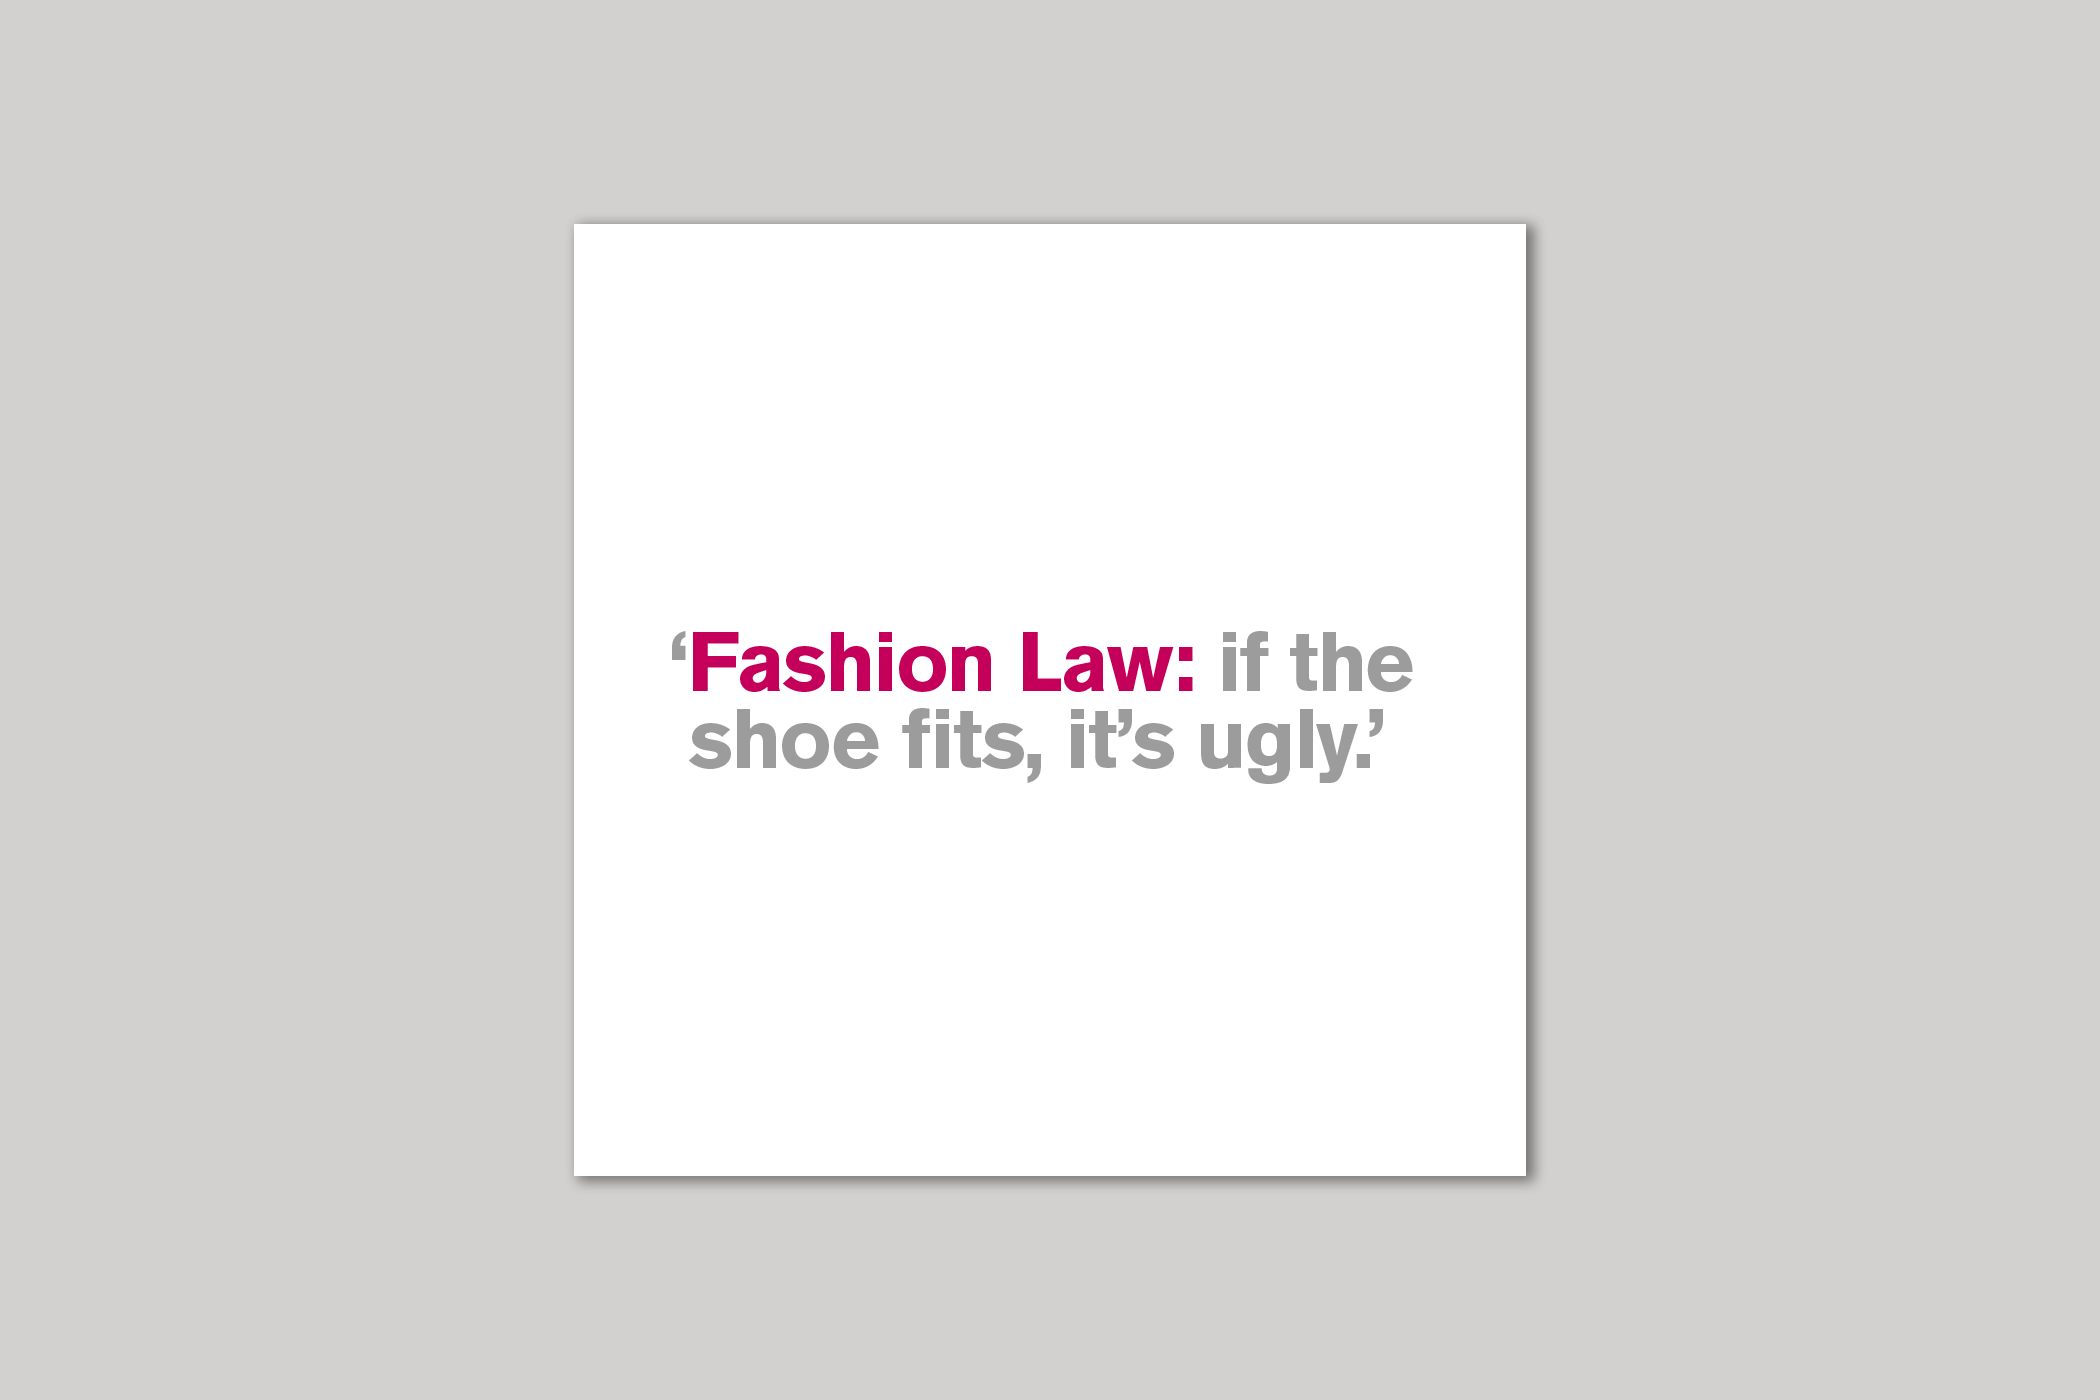 Fashion Law from Lyric range of quotation cards by Icon.